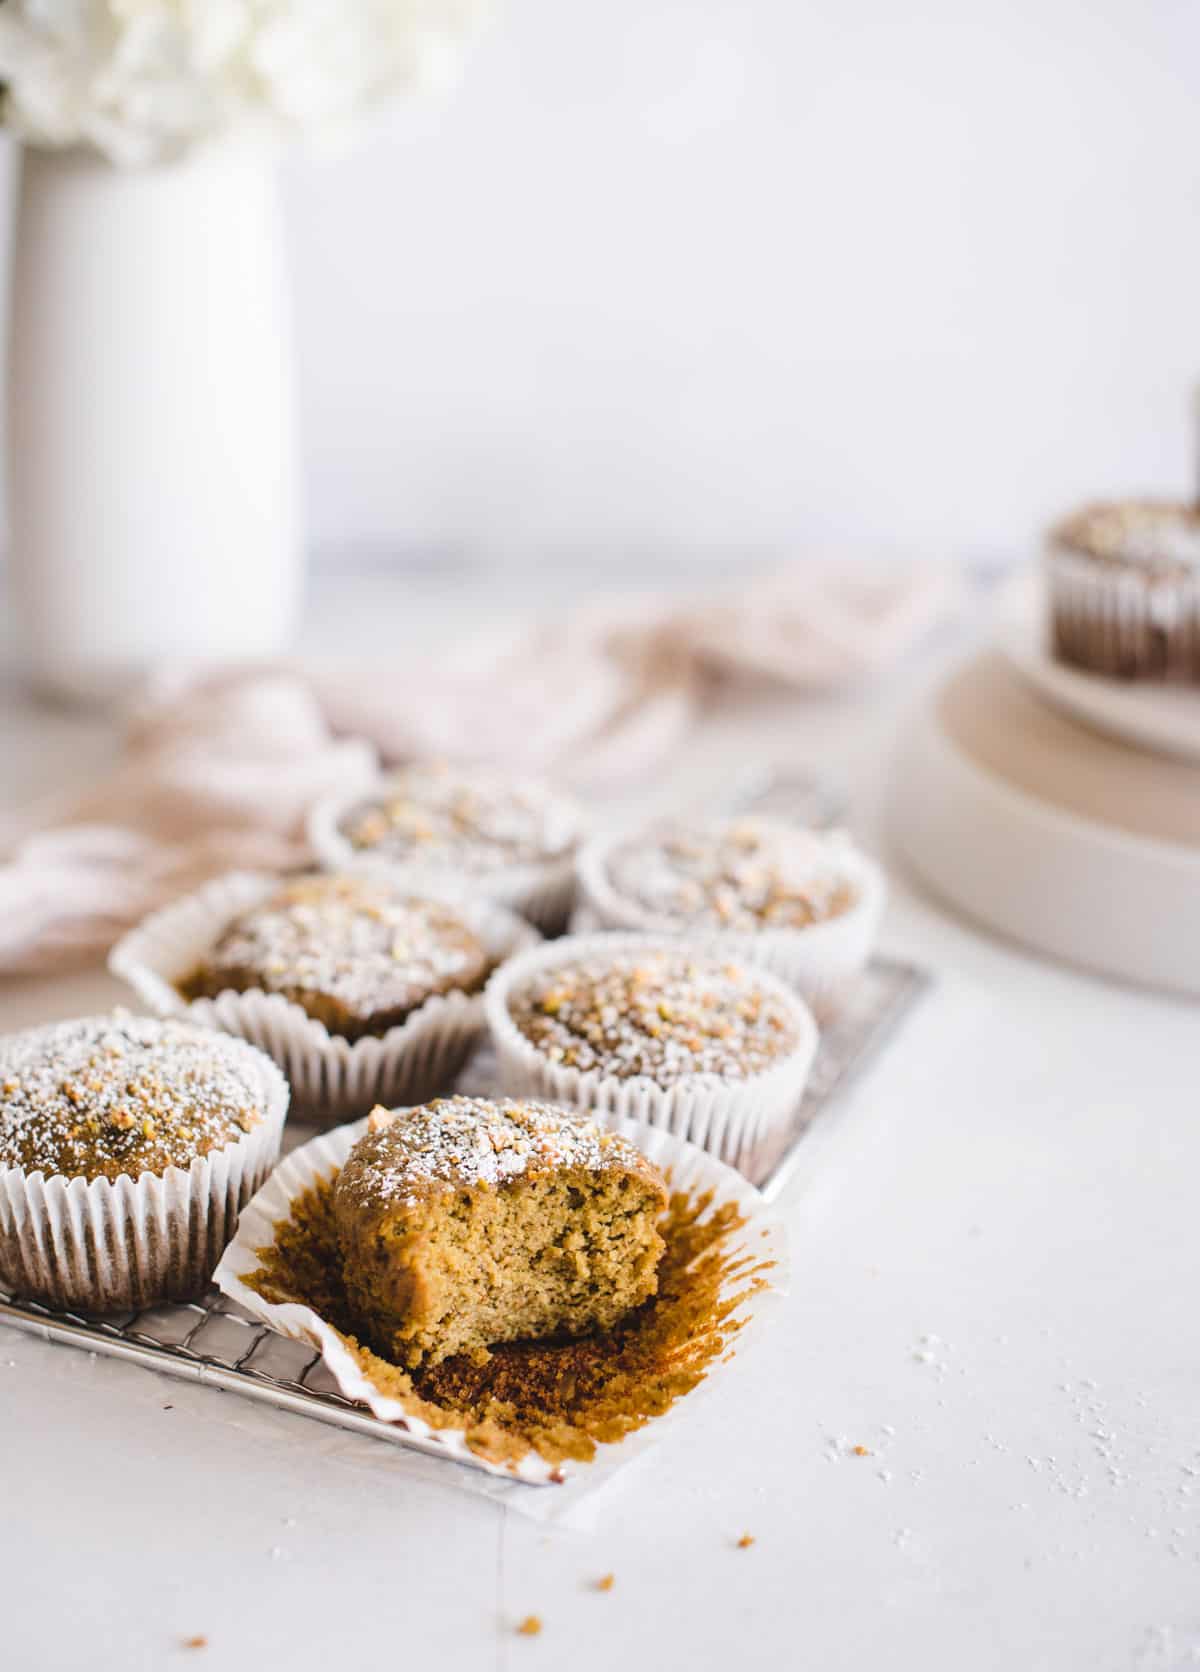 Muffin on a white background with other muffins and flowers in background